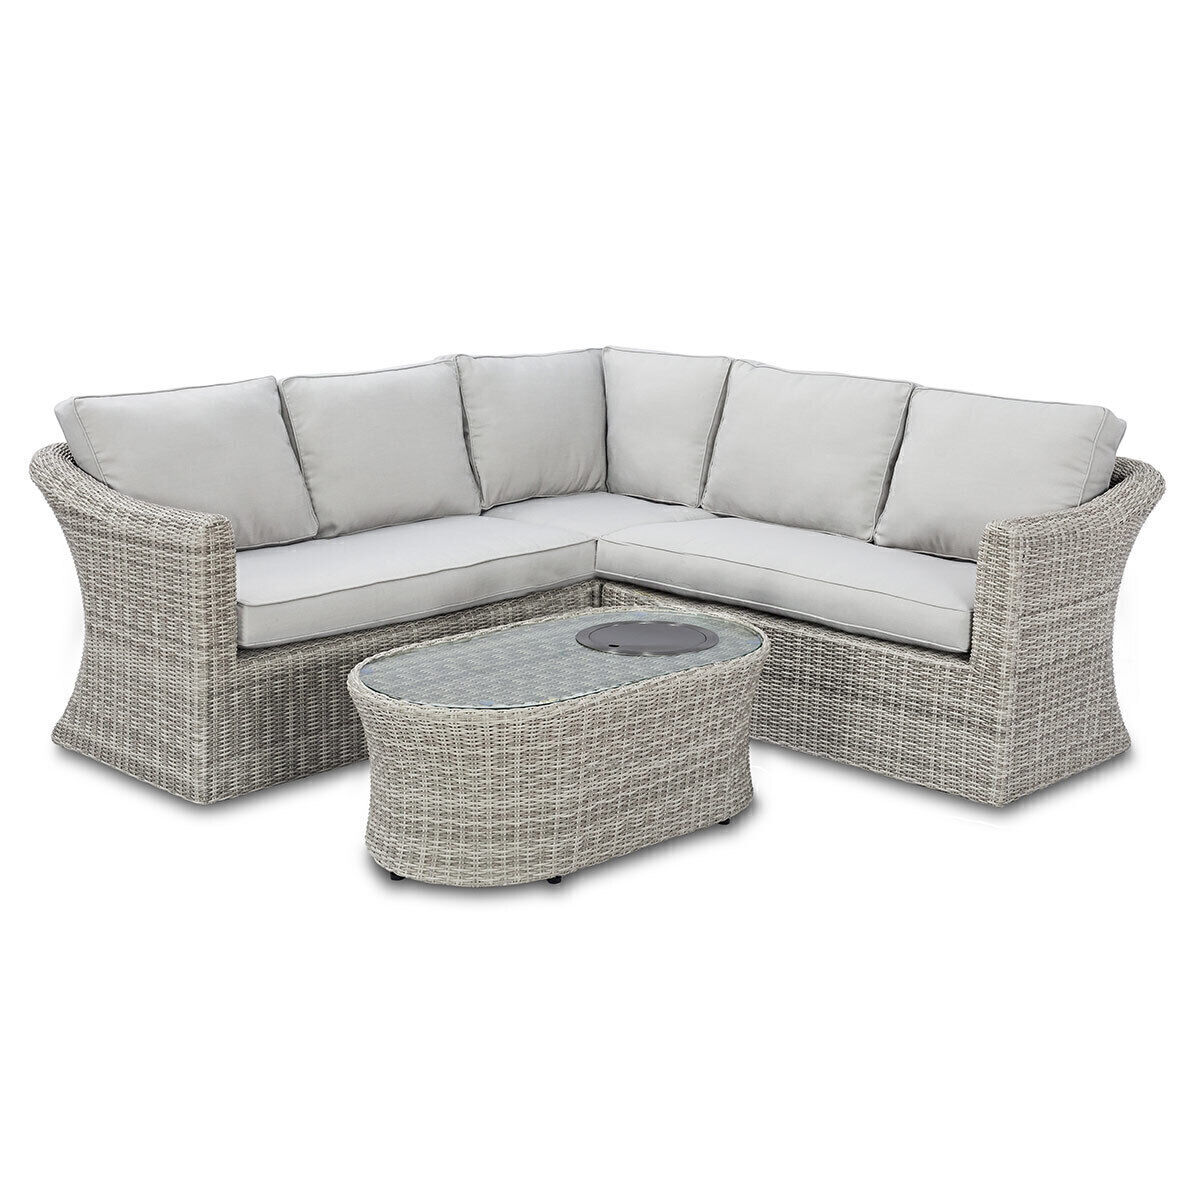 Maze - Oxford Small Rattan Corner Group with Fire Pit Coffee Table product image